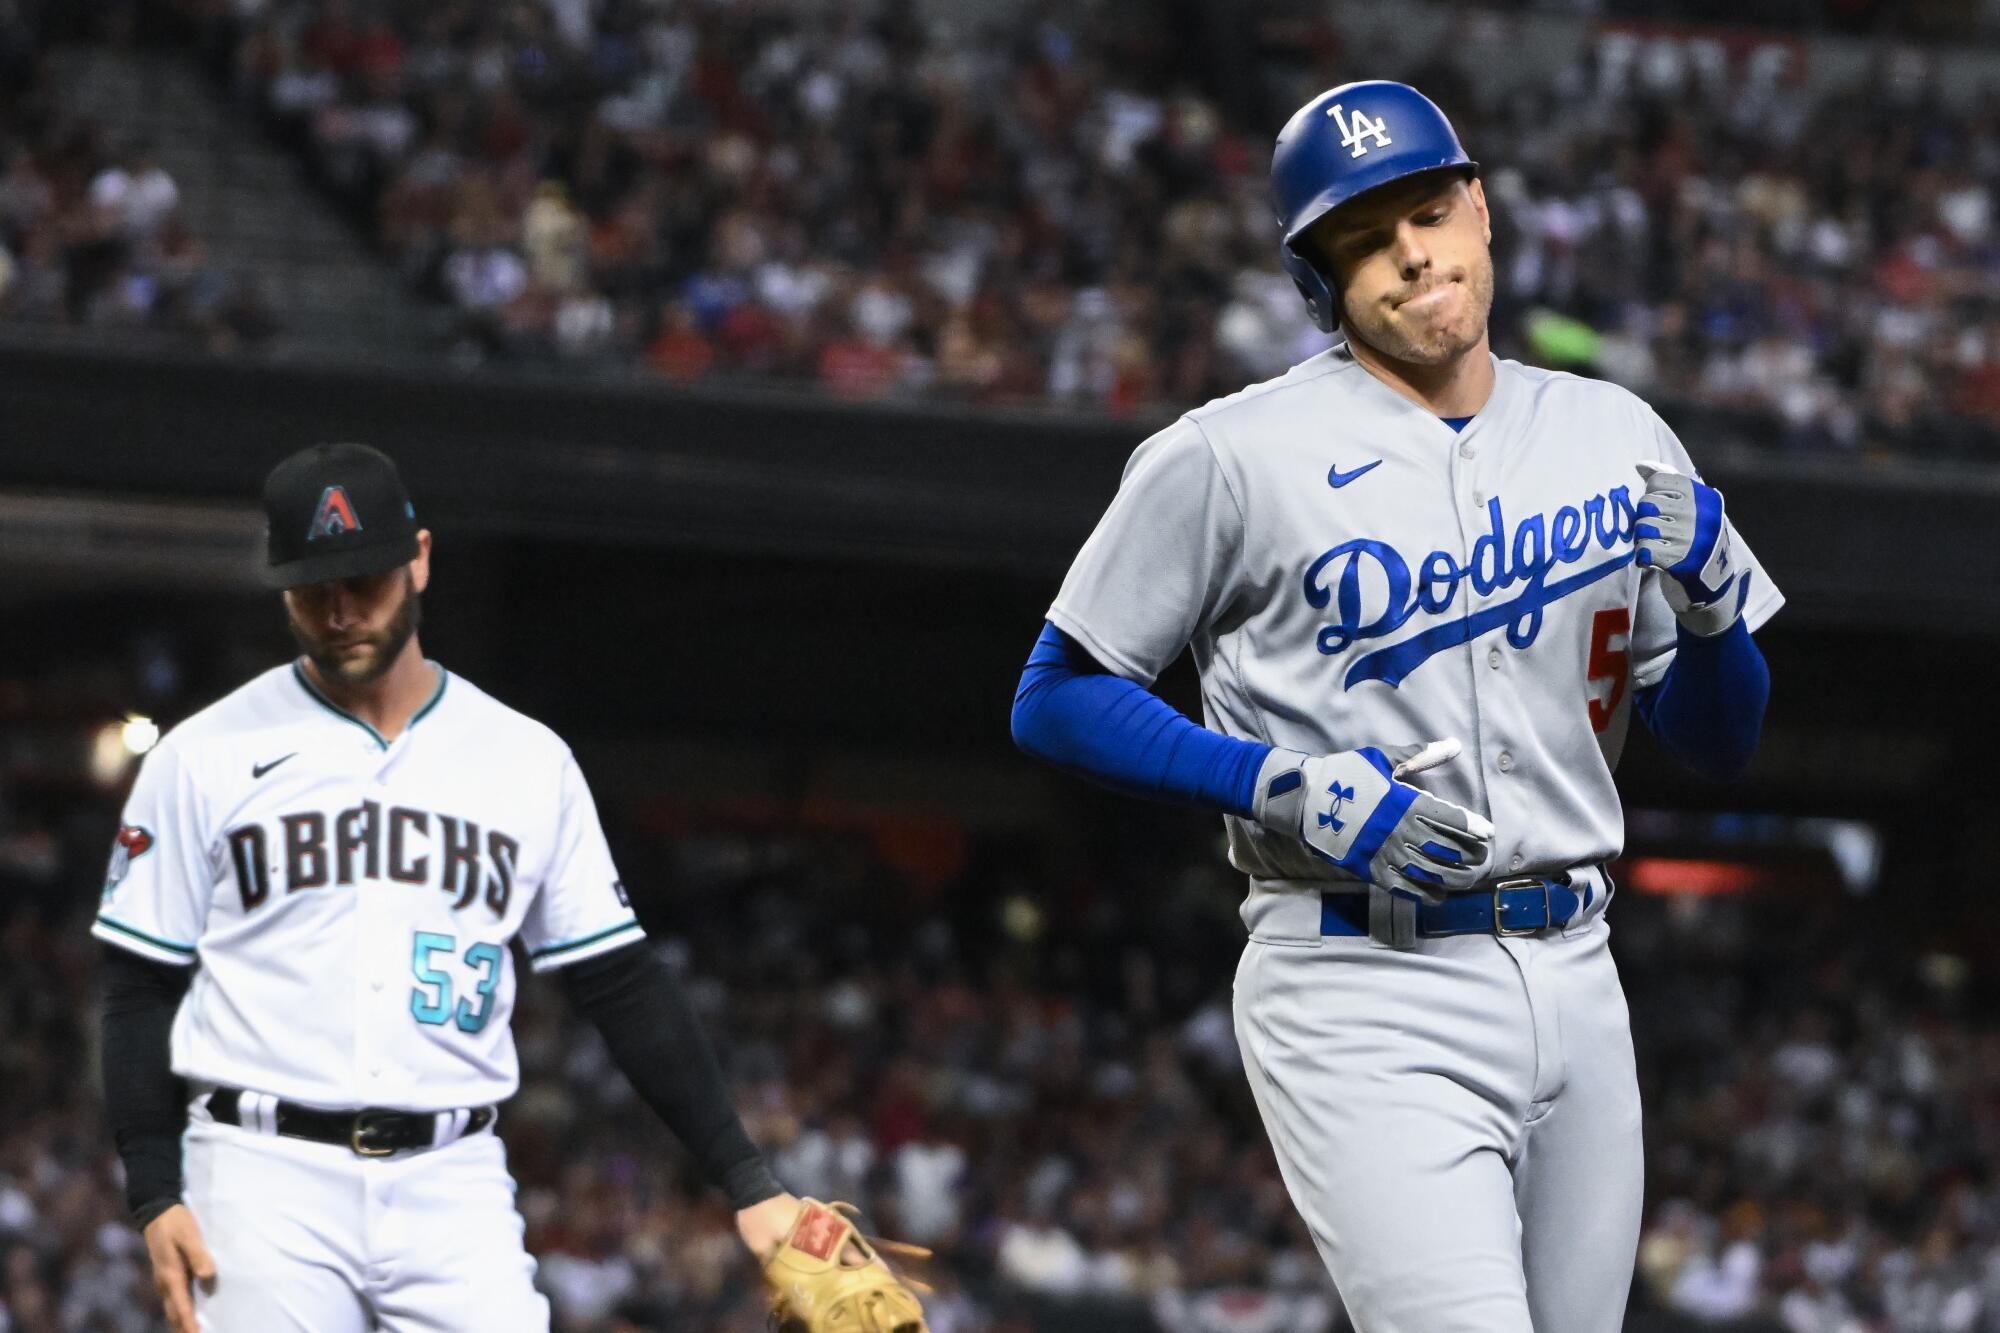 Freddie Freeman heads back to the Dodgers dugout after an out in Game 3 of the NLDS.